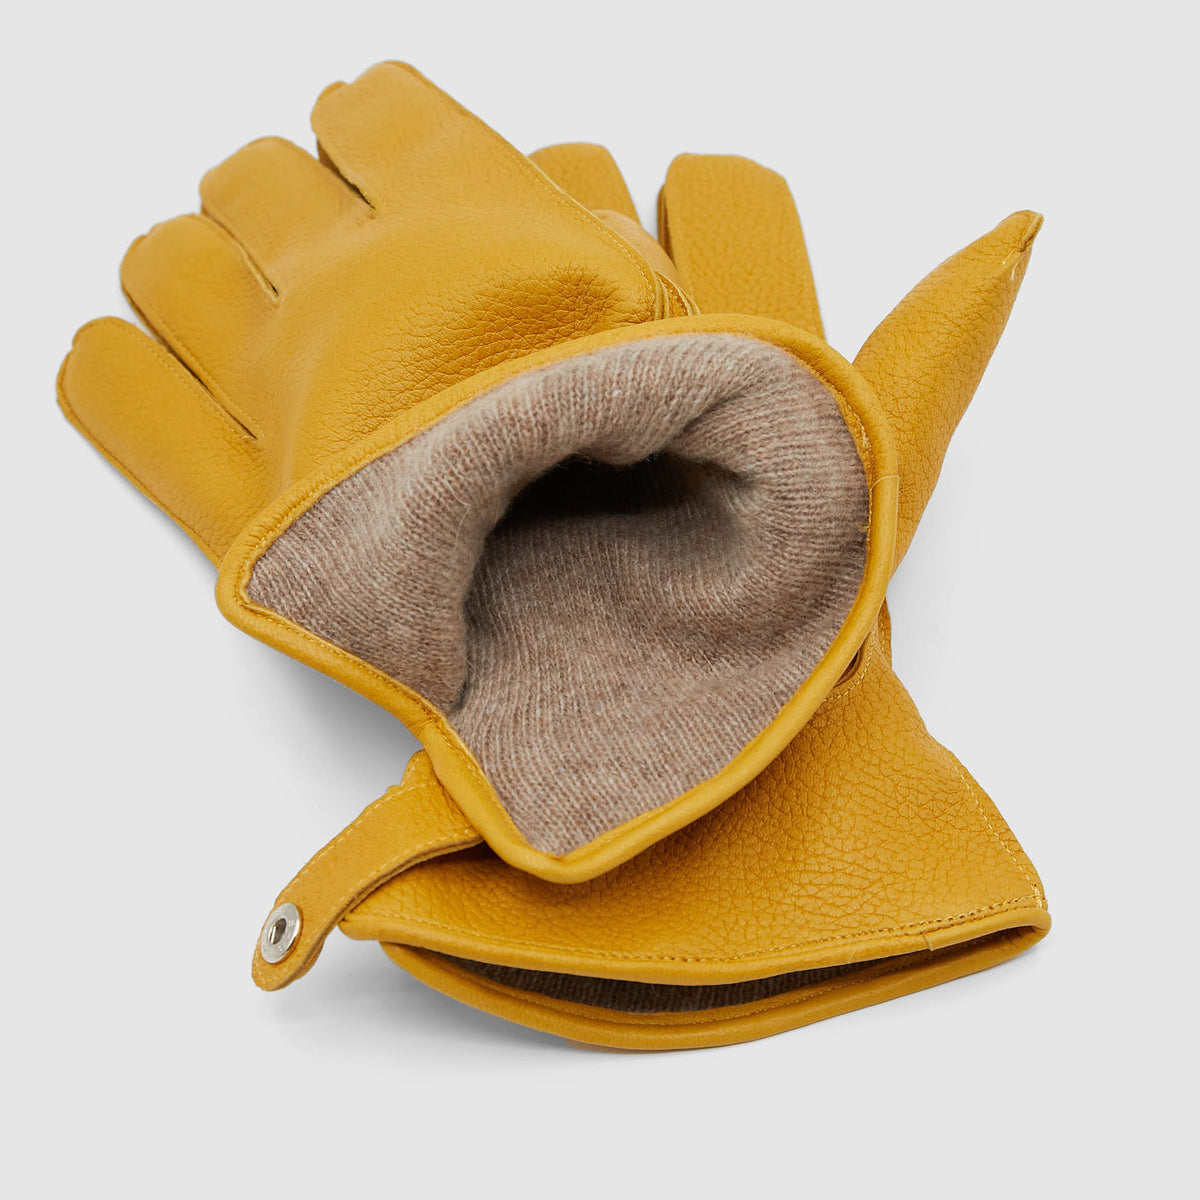 Orciani Deerskin Leather Cashmere Wool Blend Lined Gloves